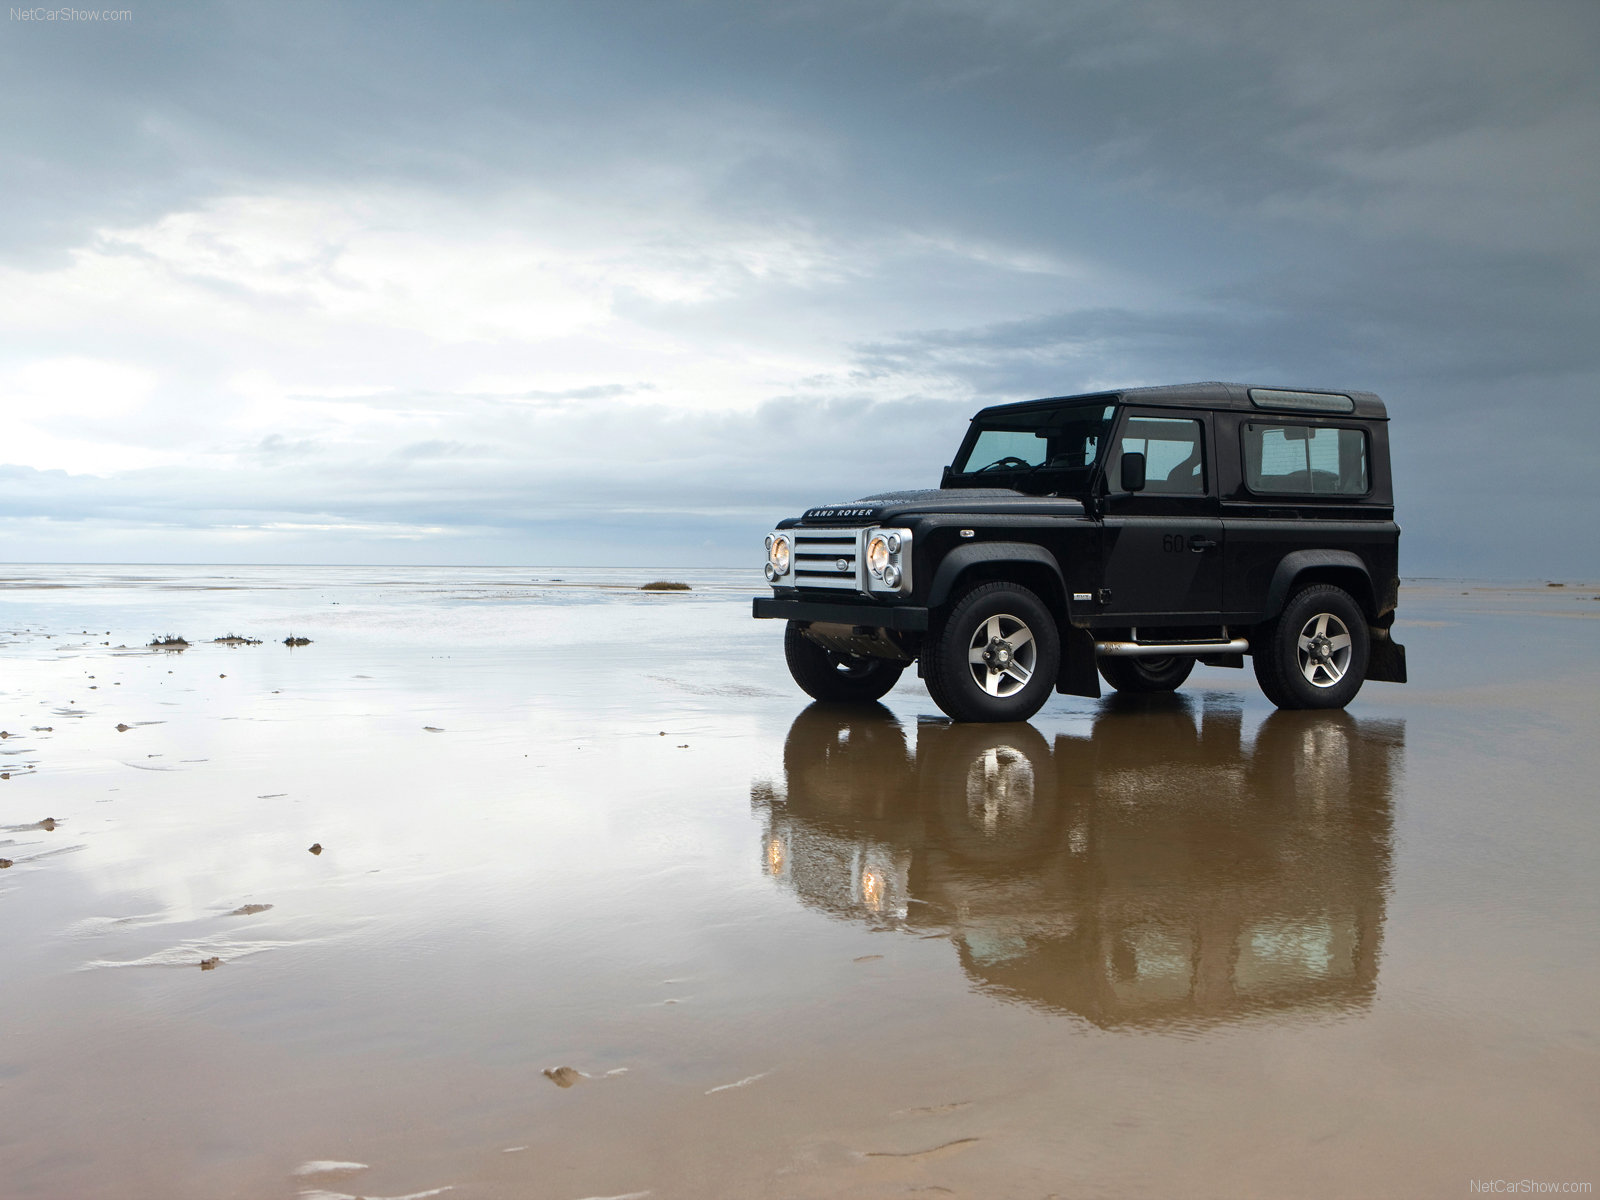 Download full size jeep Land Rover wallpaper / 1600x1200